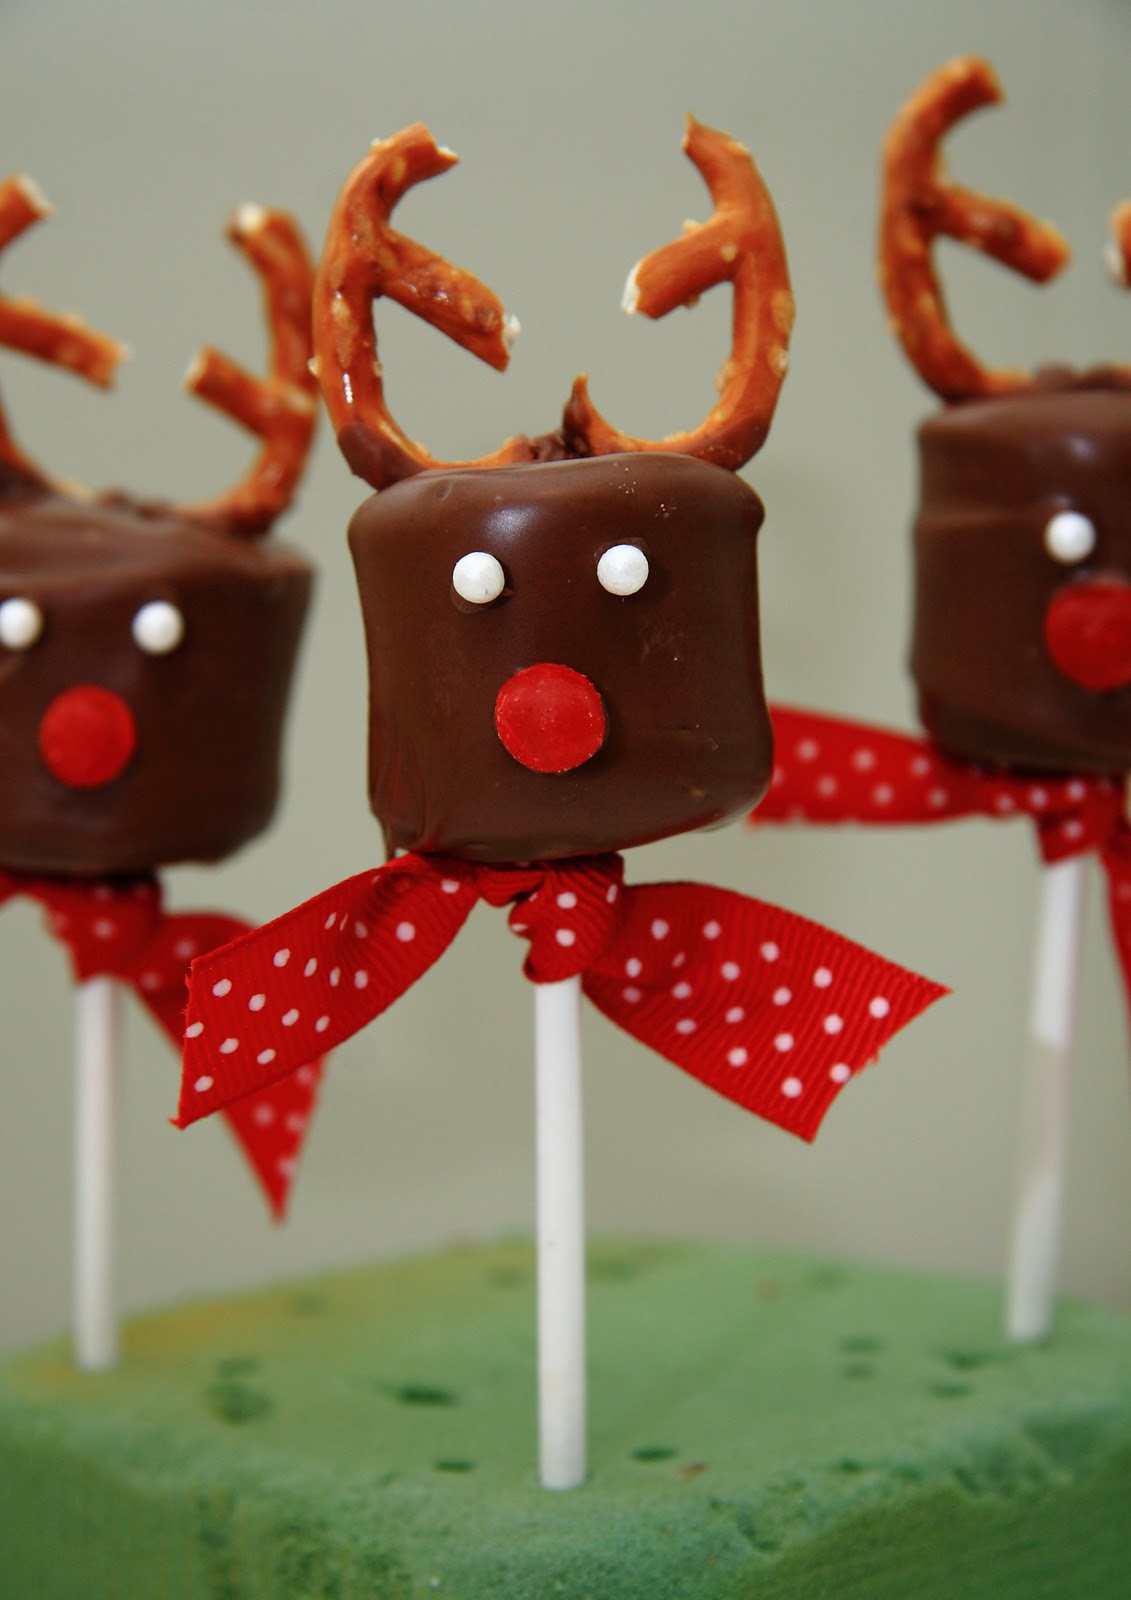 Christmas Party Ideas For Toddlers
 21 Amazing Christmas Party Ideas for Kids